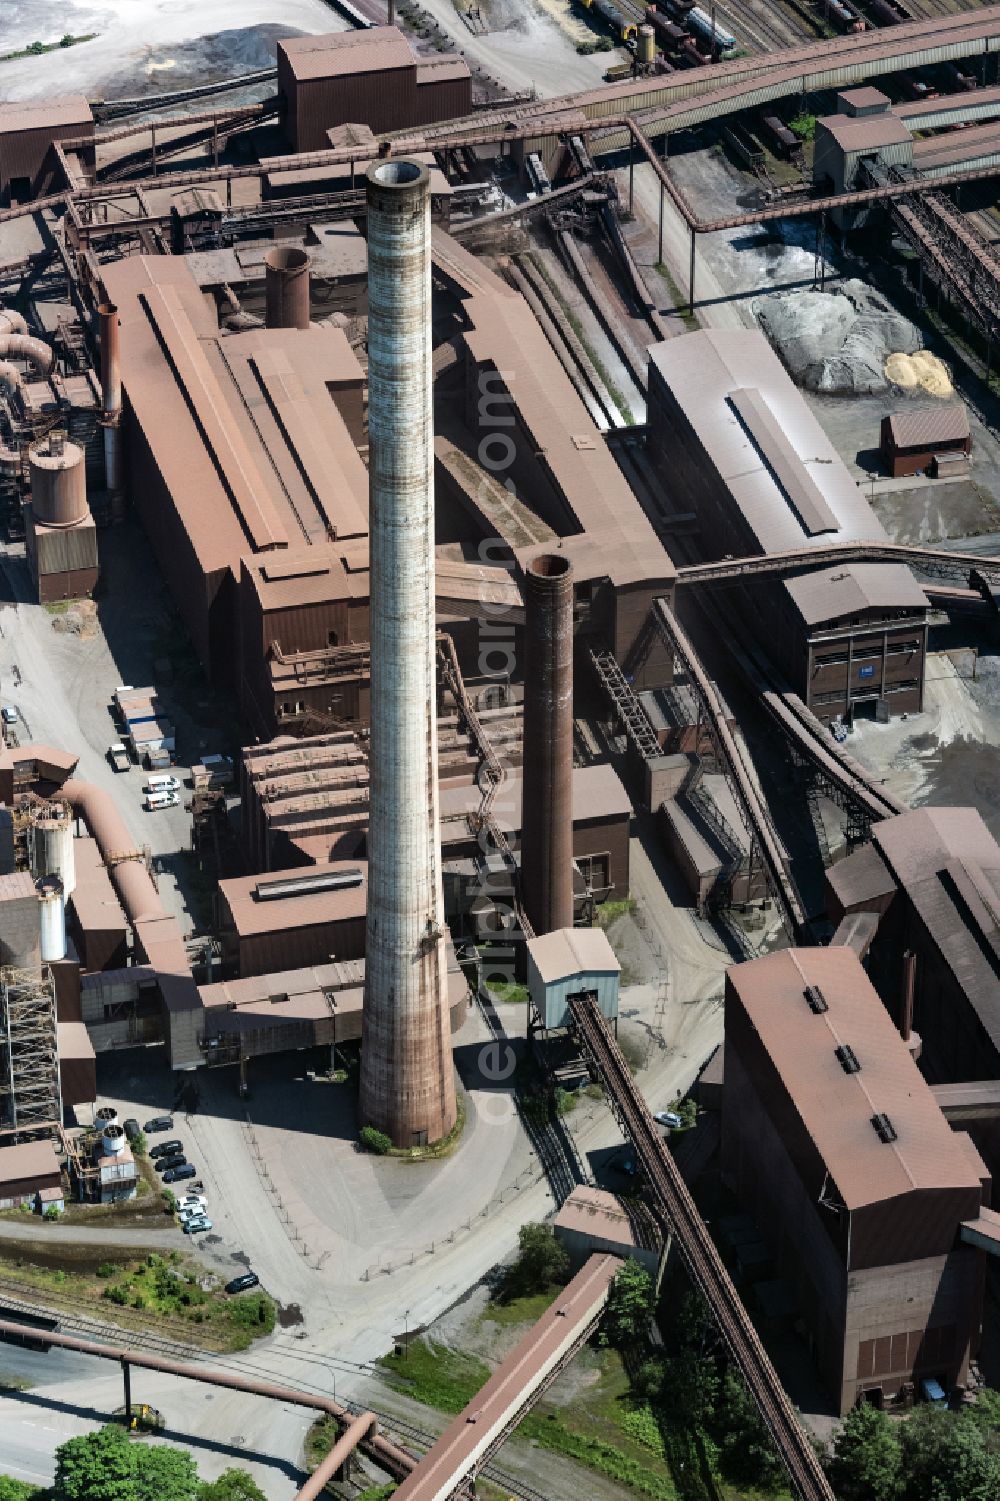 Aerial image Dillingen/Saar - Technical equipment and production facilities of the steelworks Zentralkokerei Saar GmbH in Dillingen/Saar in the state Saarland, Germany